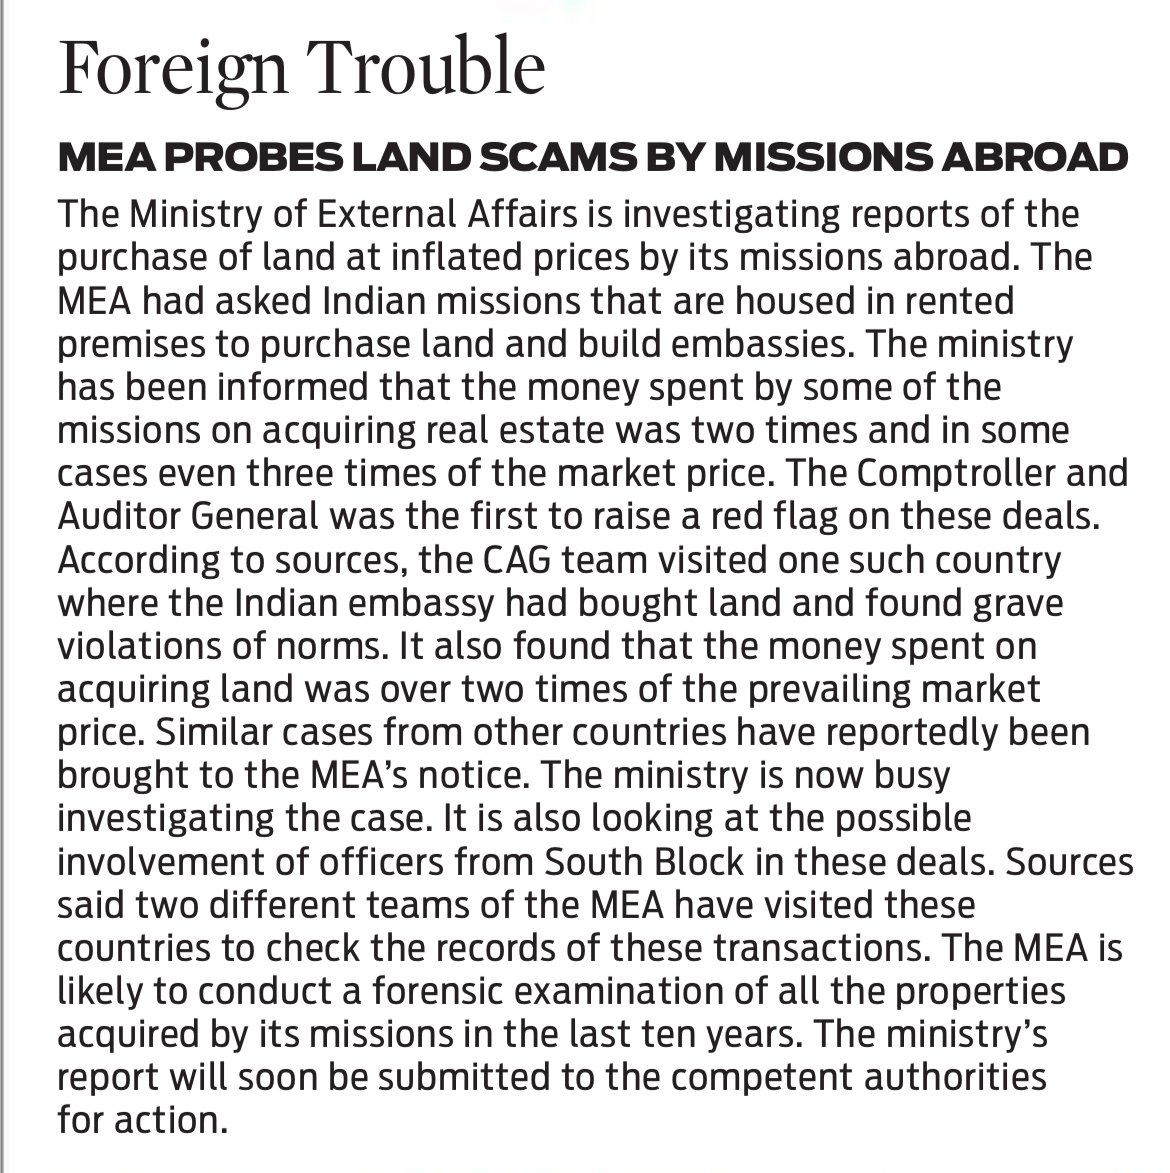 MEA is being compelled to probe because CAG has caught the land scam in foreign countries in the past 10 years of the Modi govt. No prizes for guessing who has been running the MEA for most of these 10 years.